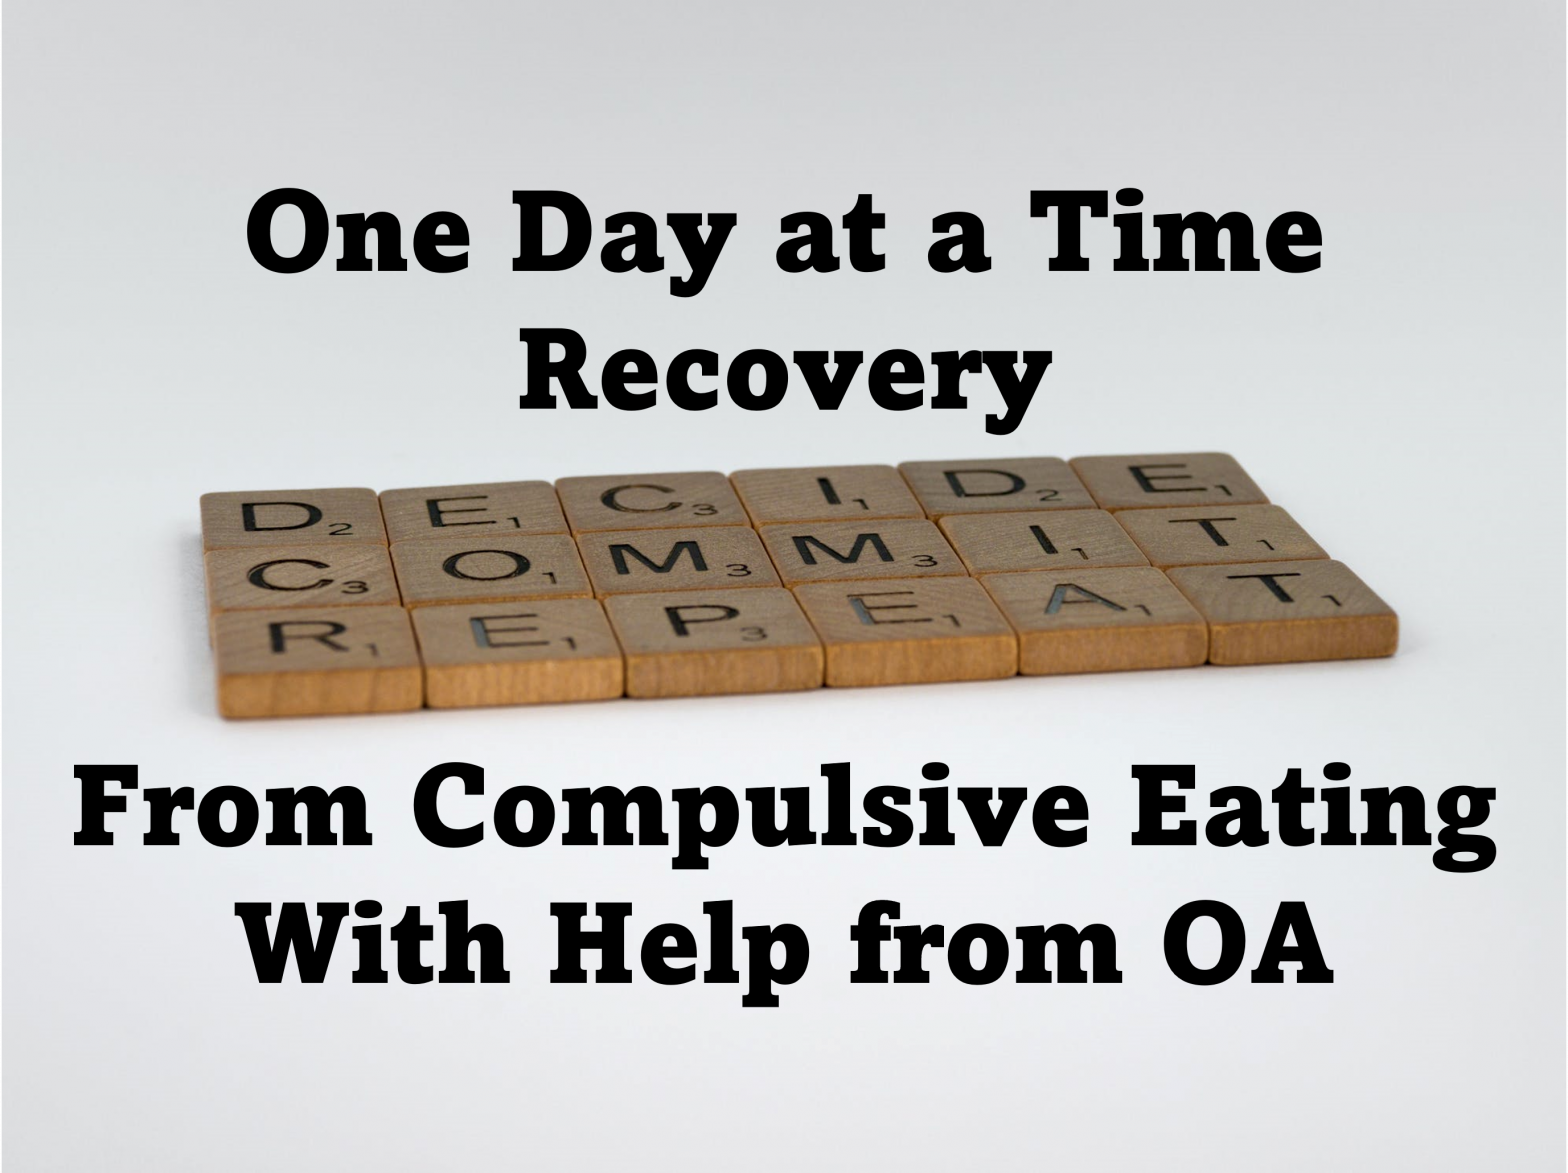 One day at a time recovery from compulsive eating with OA